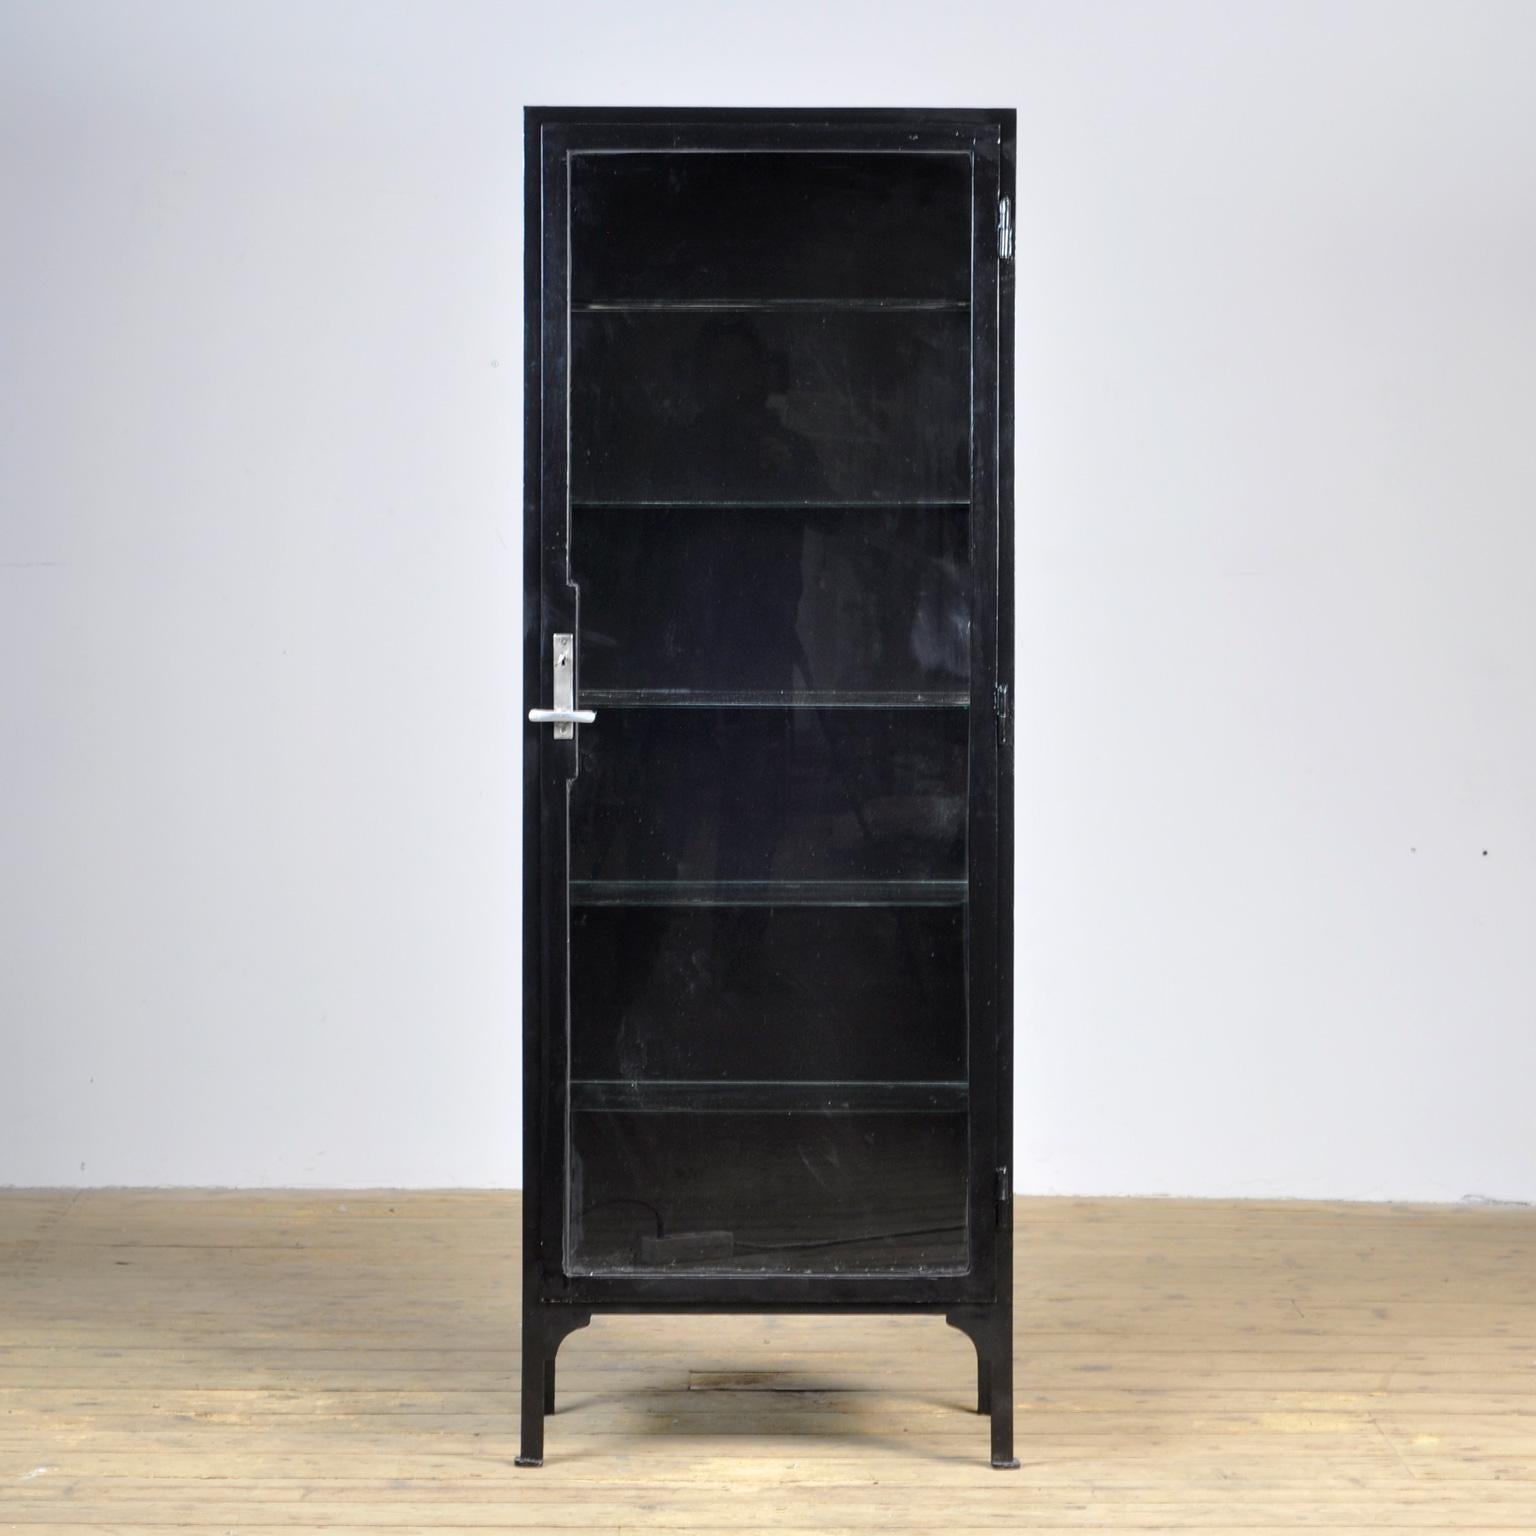 This medicine cabinet was produced in the 1940s in Hungary. The cabinet is made from thick steel and glass. It features five glass shelves.
De cabinet has been lacquered black recently.